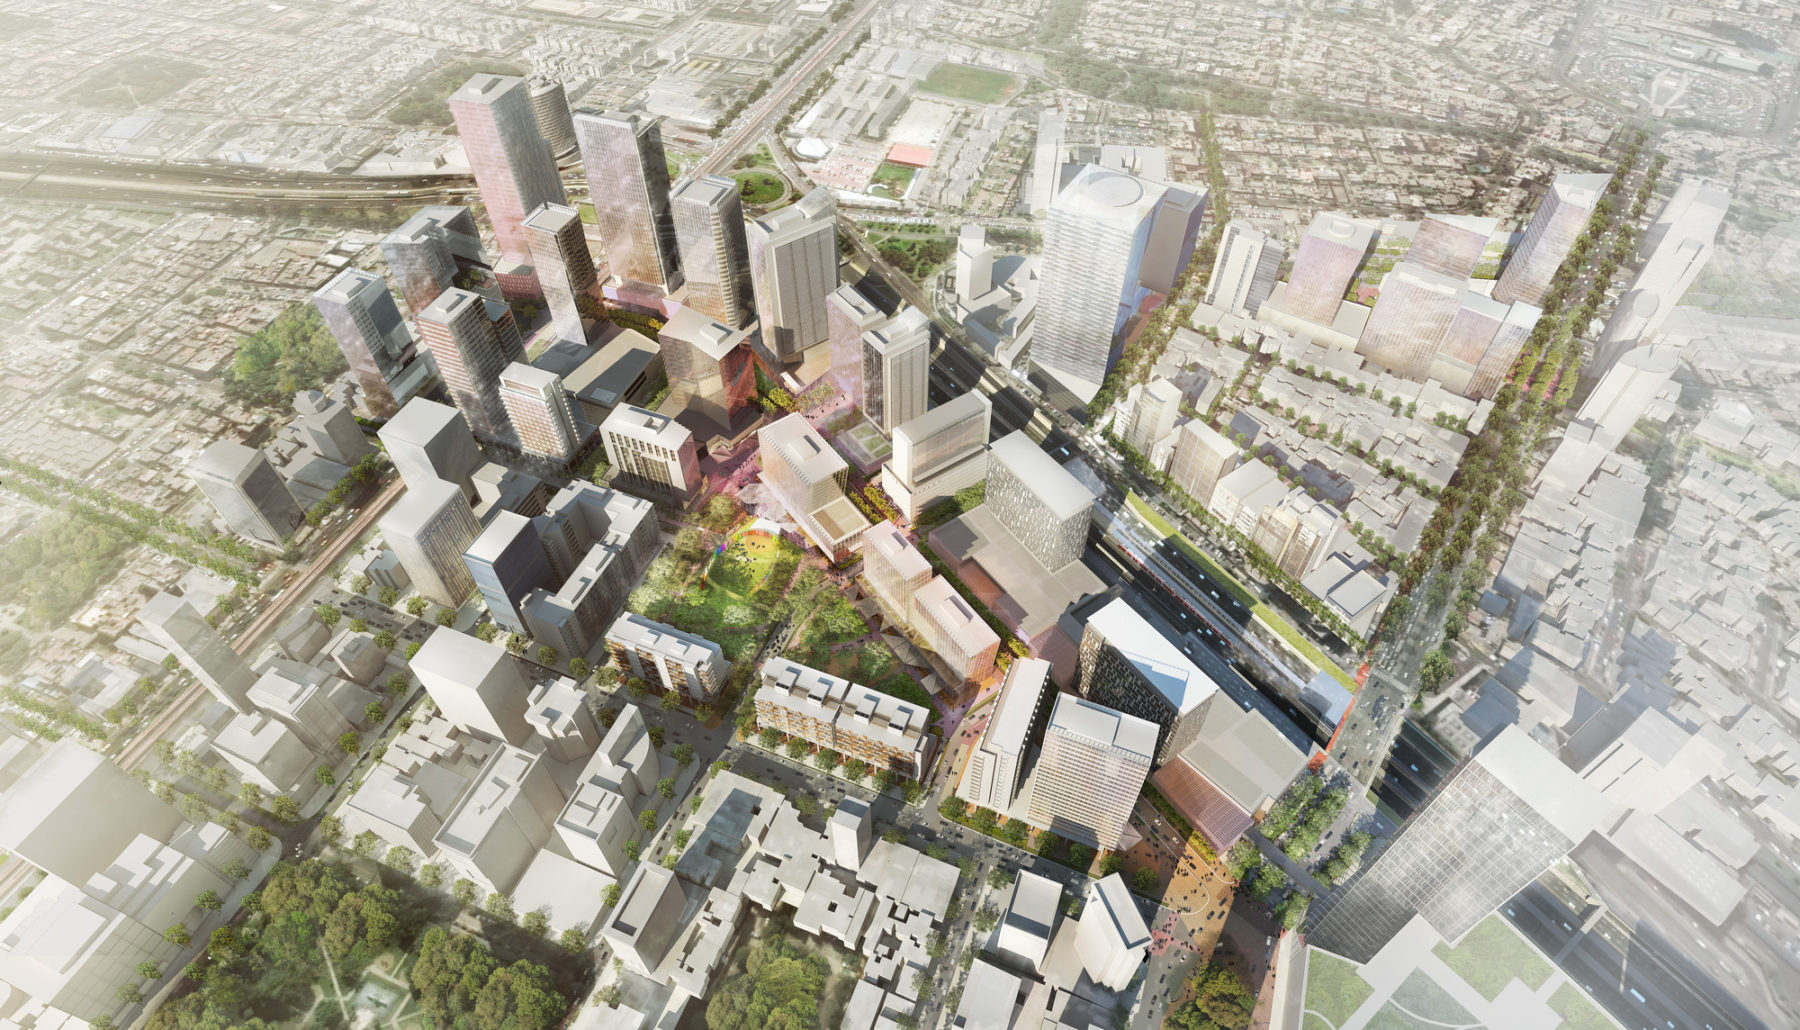 Render of proposed financial district. Multiple high rise buildings spanning multiple blocks